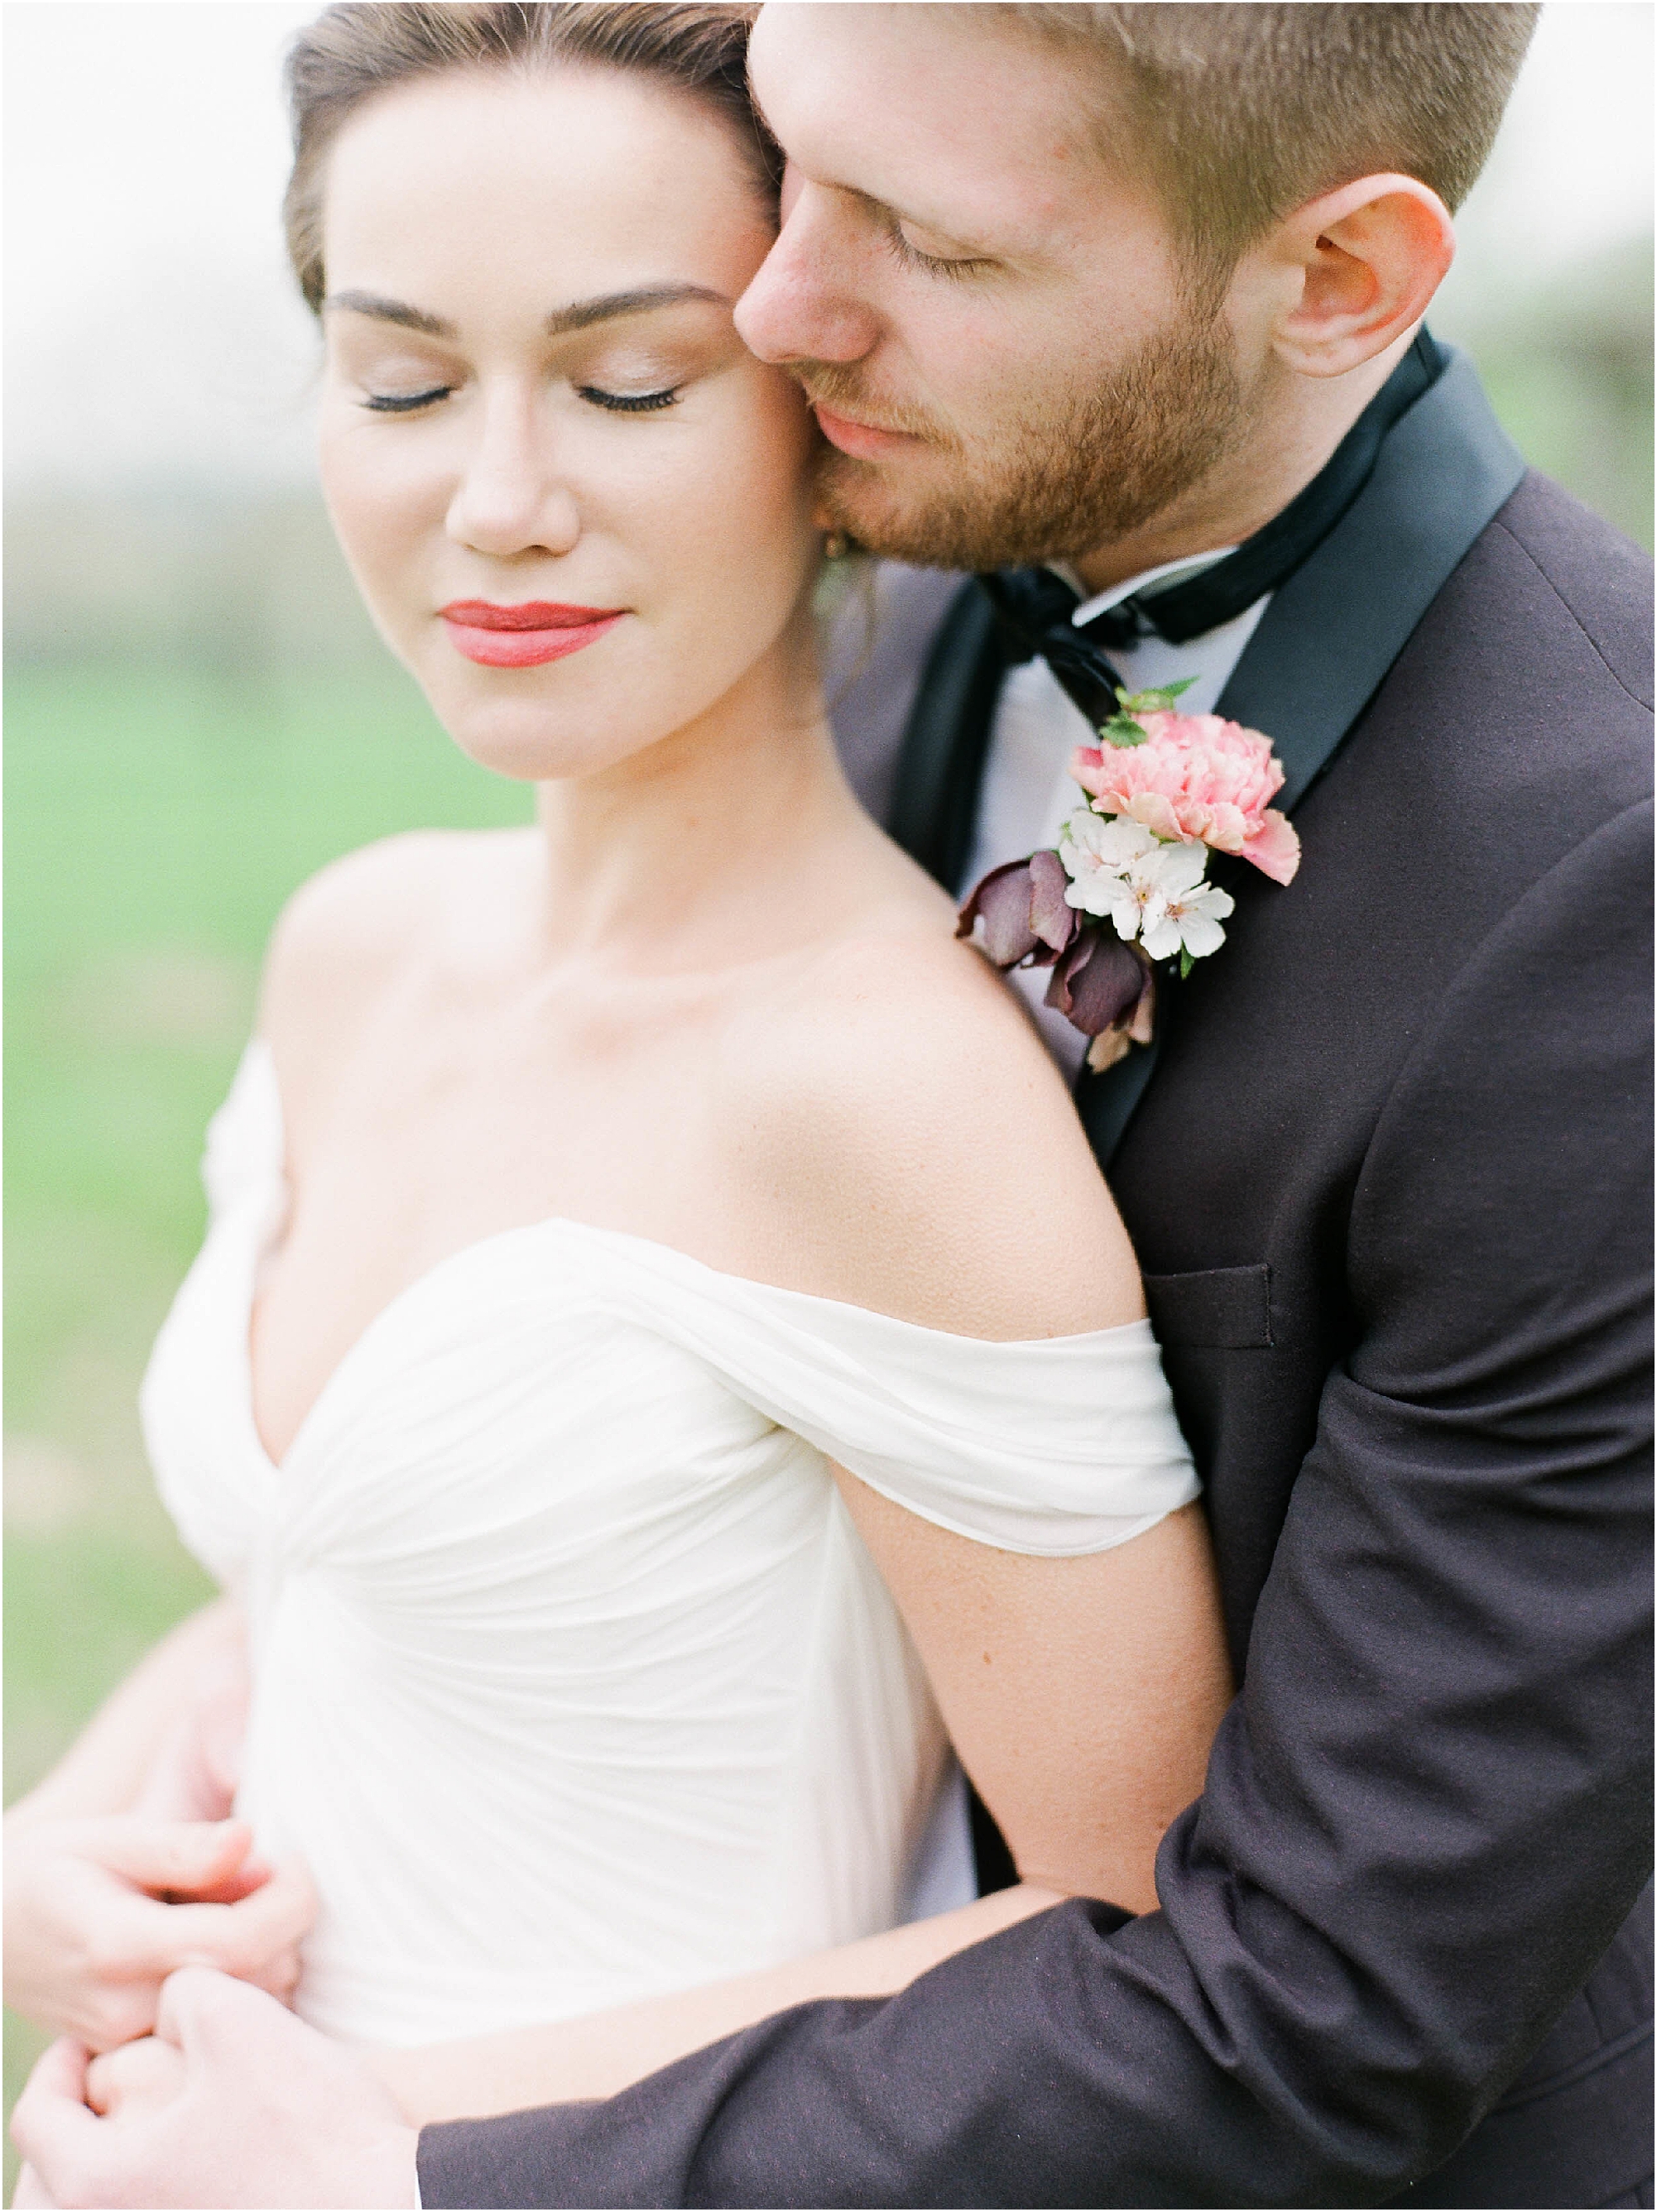 Bride and Groom in tender embrace by film wedding photographer Camilla Arnhold